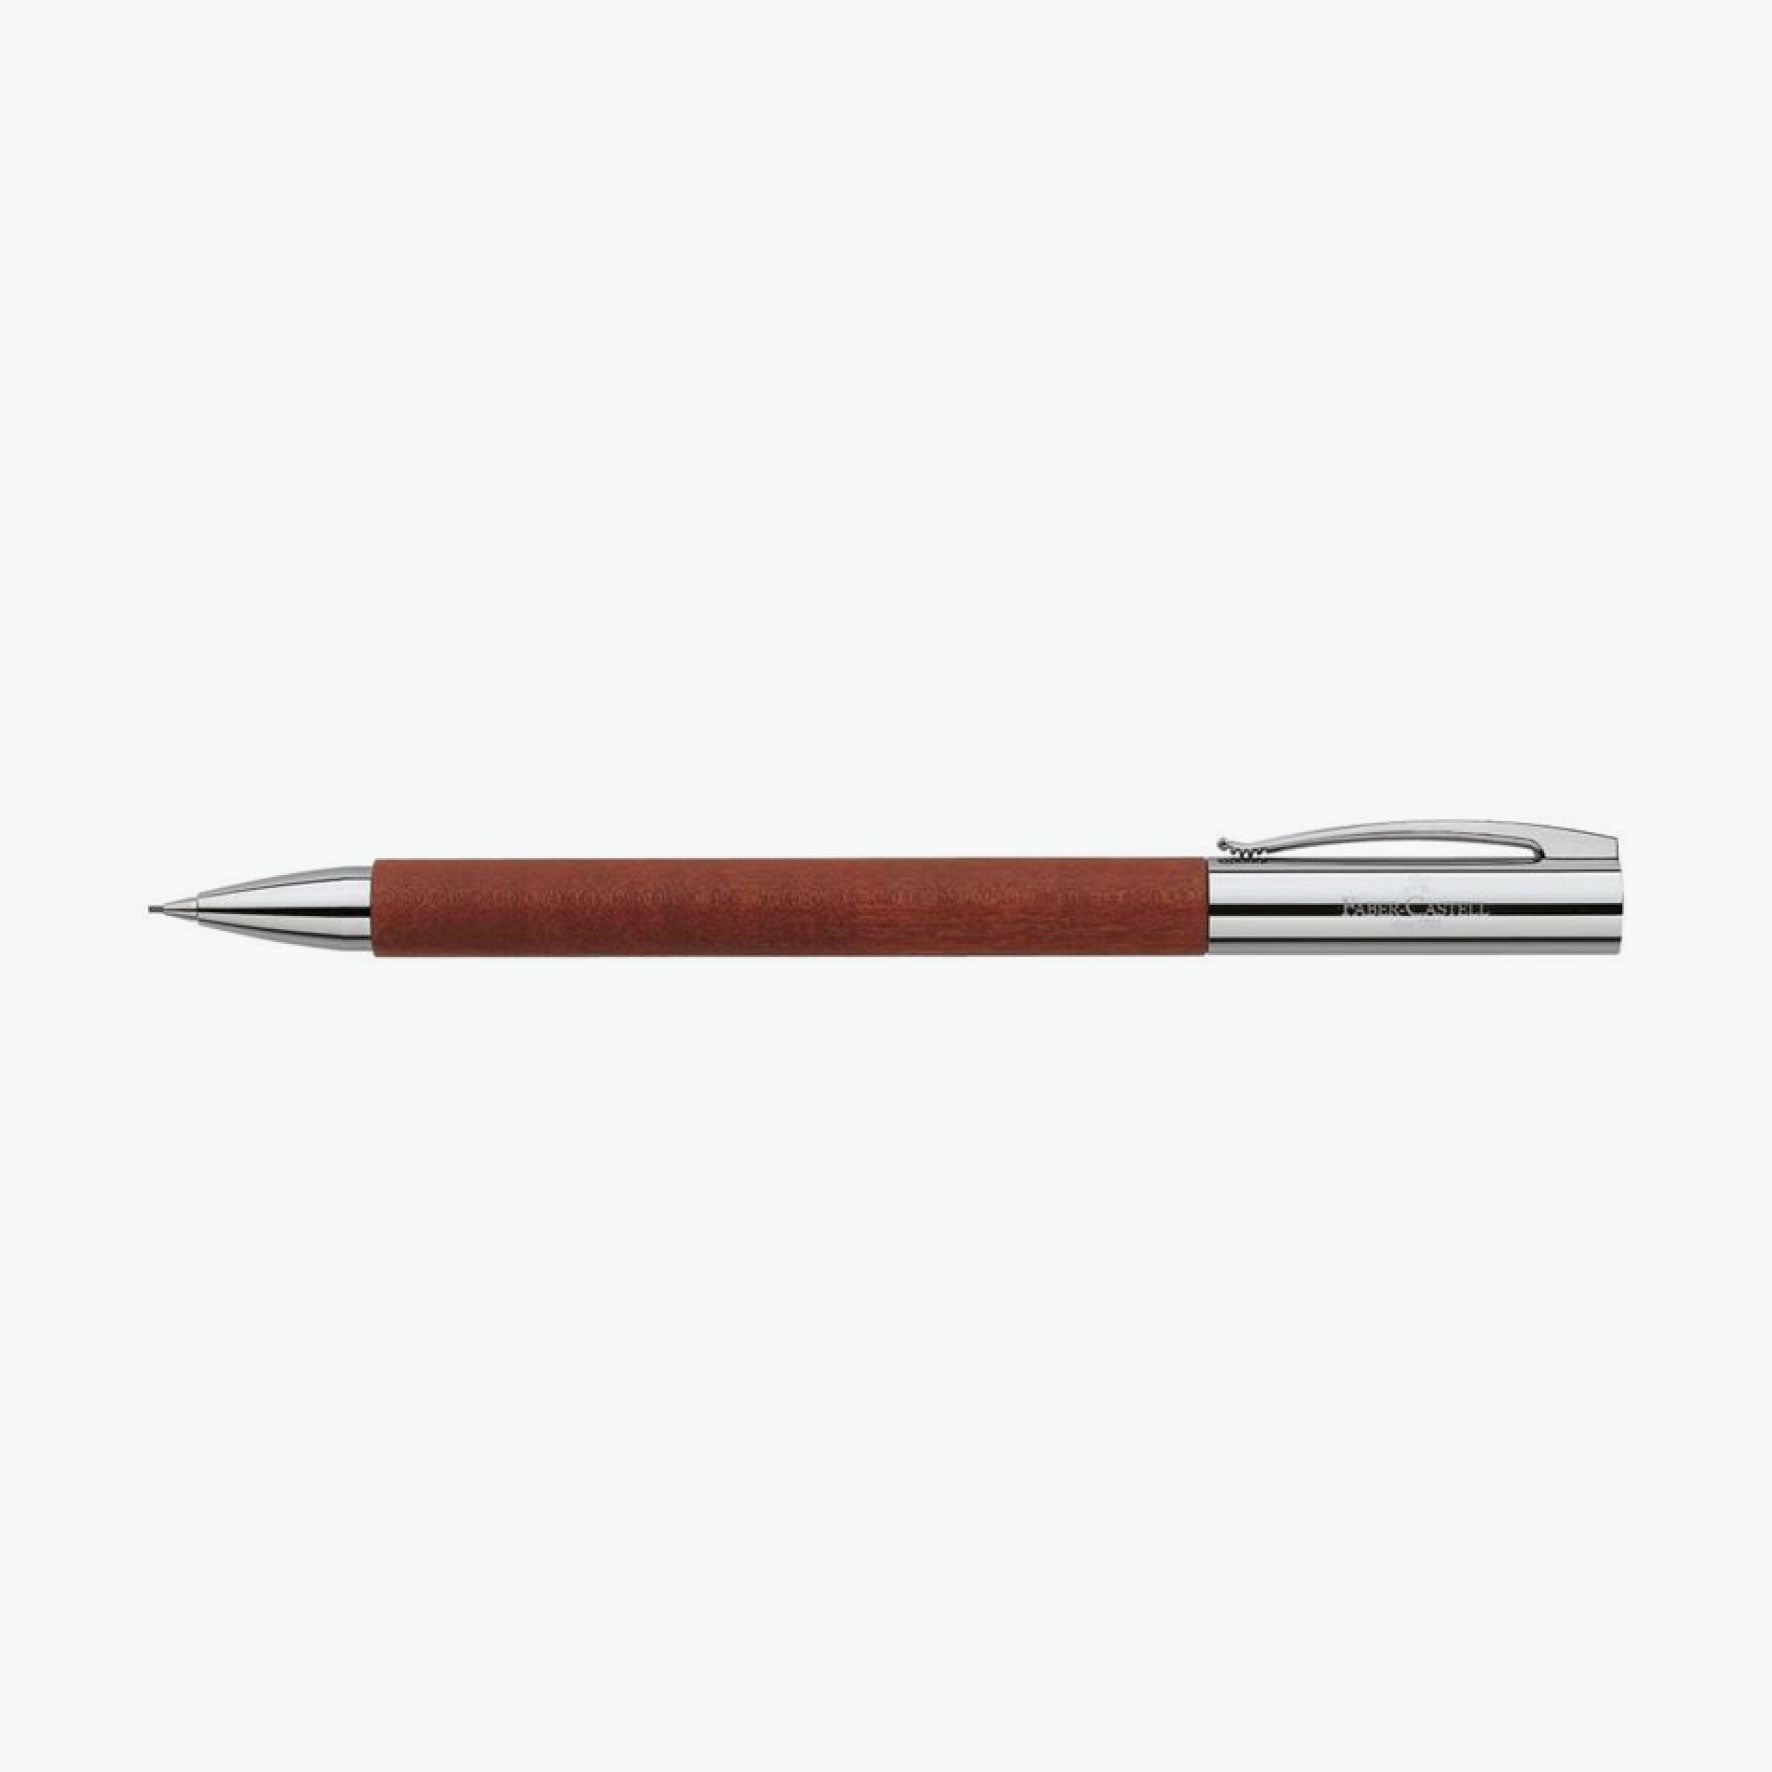 Faber-Castell - Mechanical Pencil - Ambition - Pearwood Brown